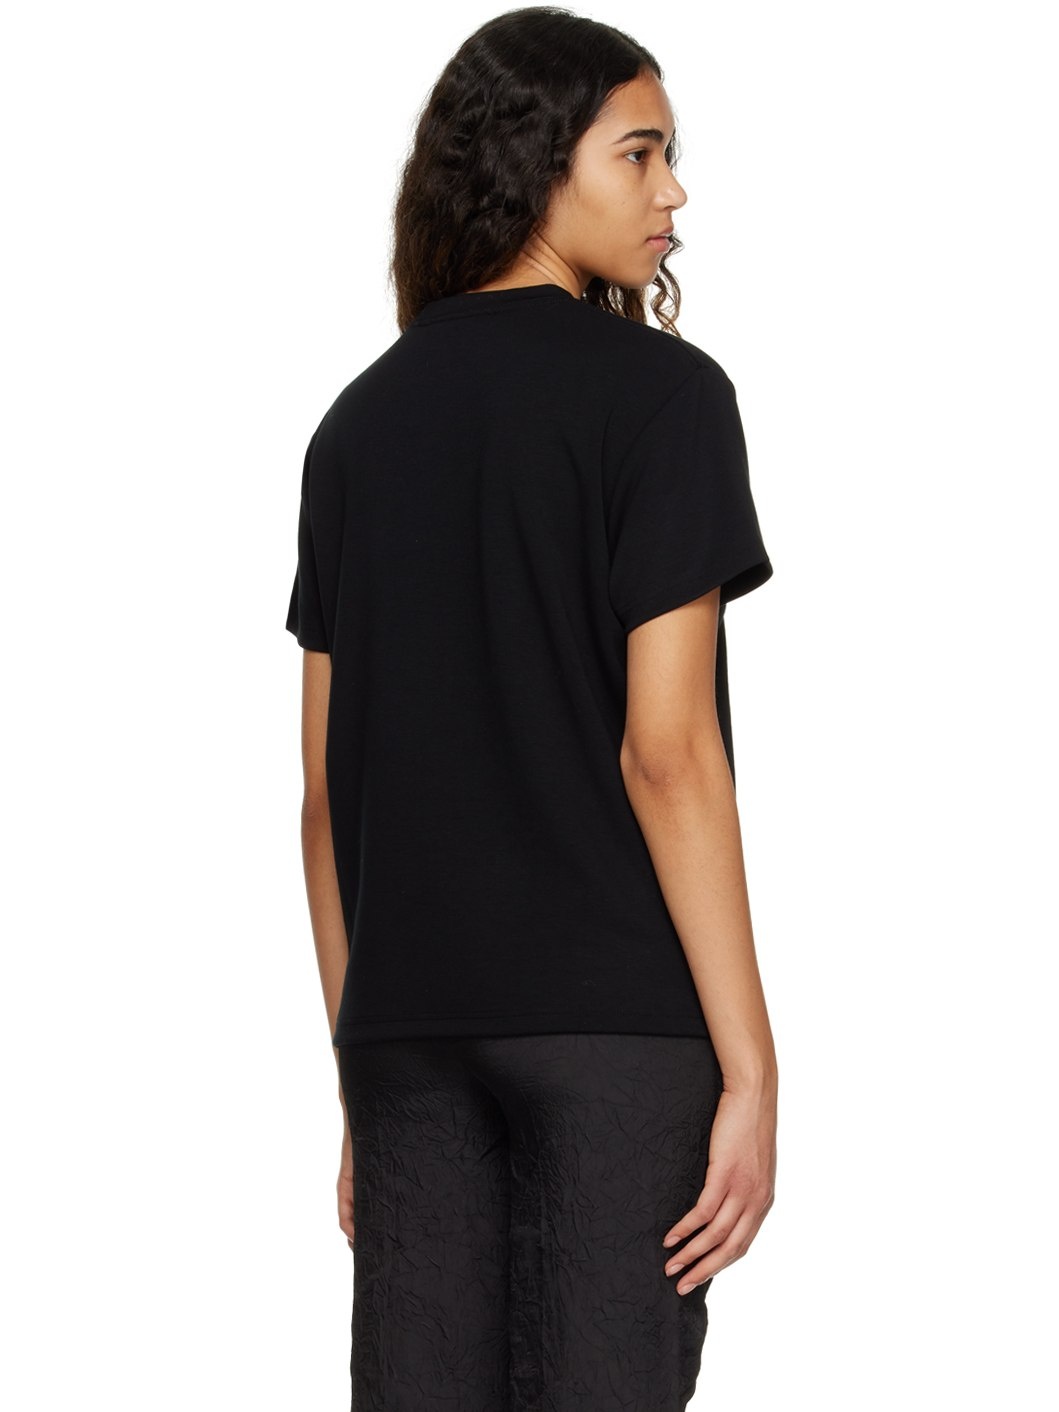 Black 'AB' Embroidered T-Shirt - 3